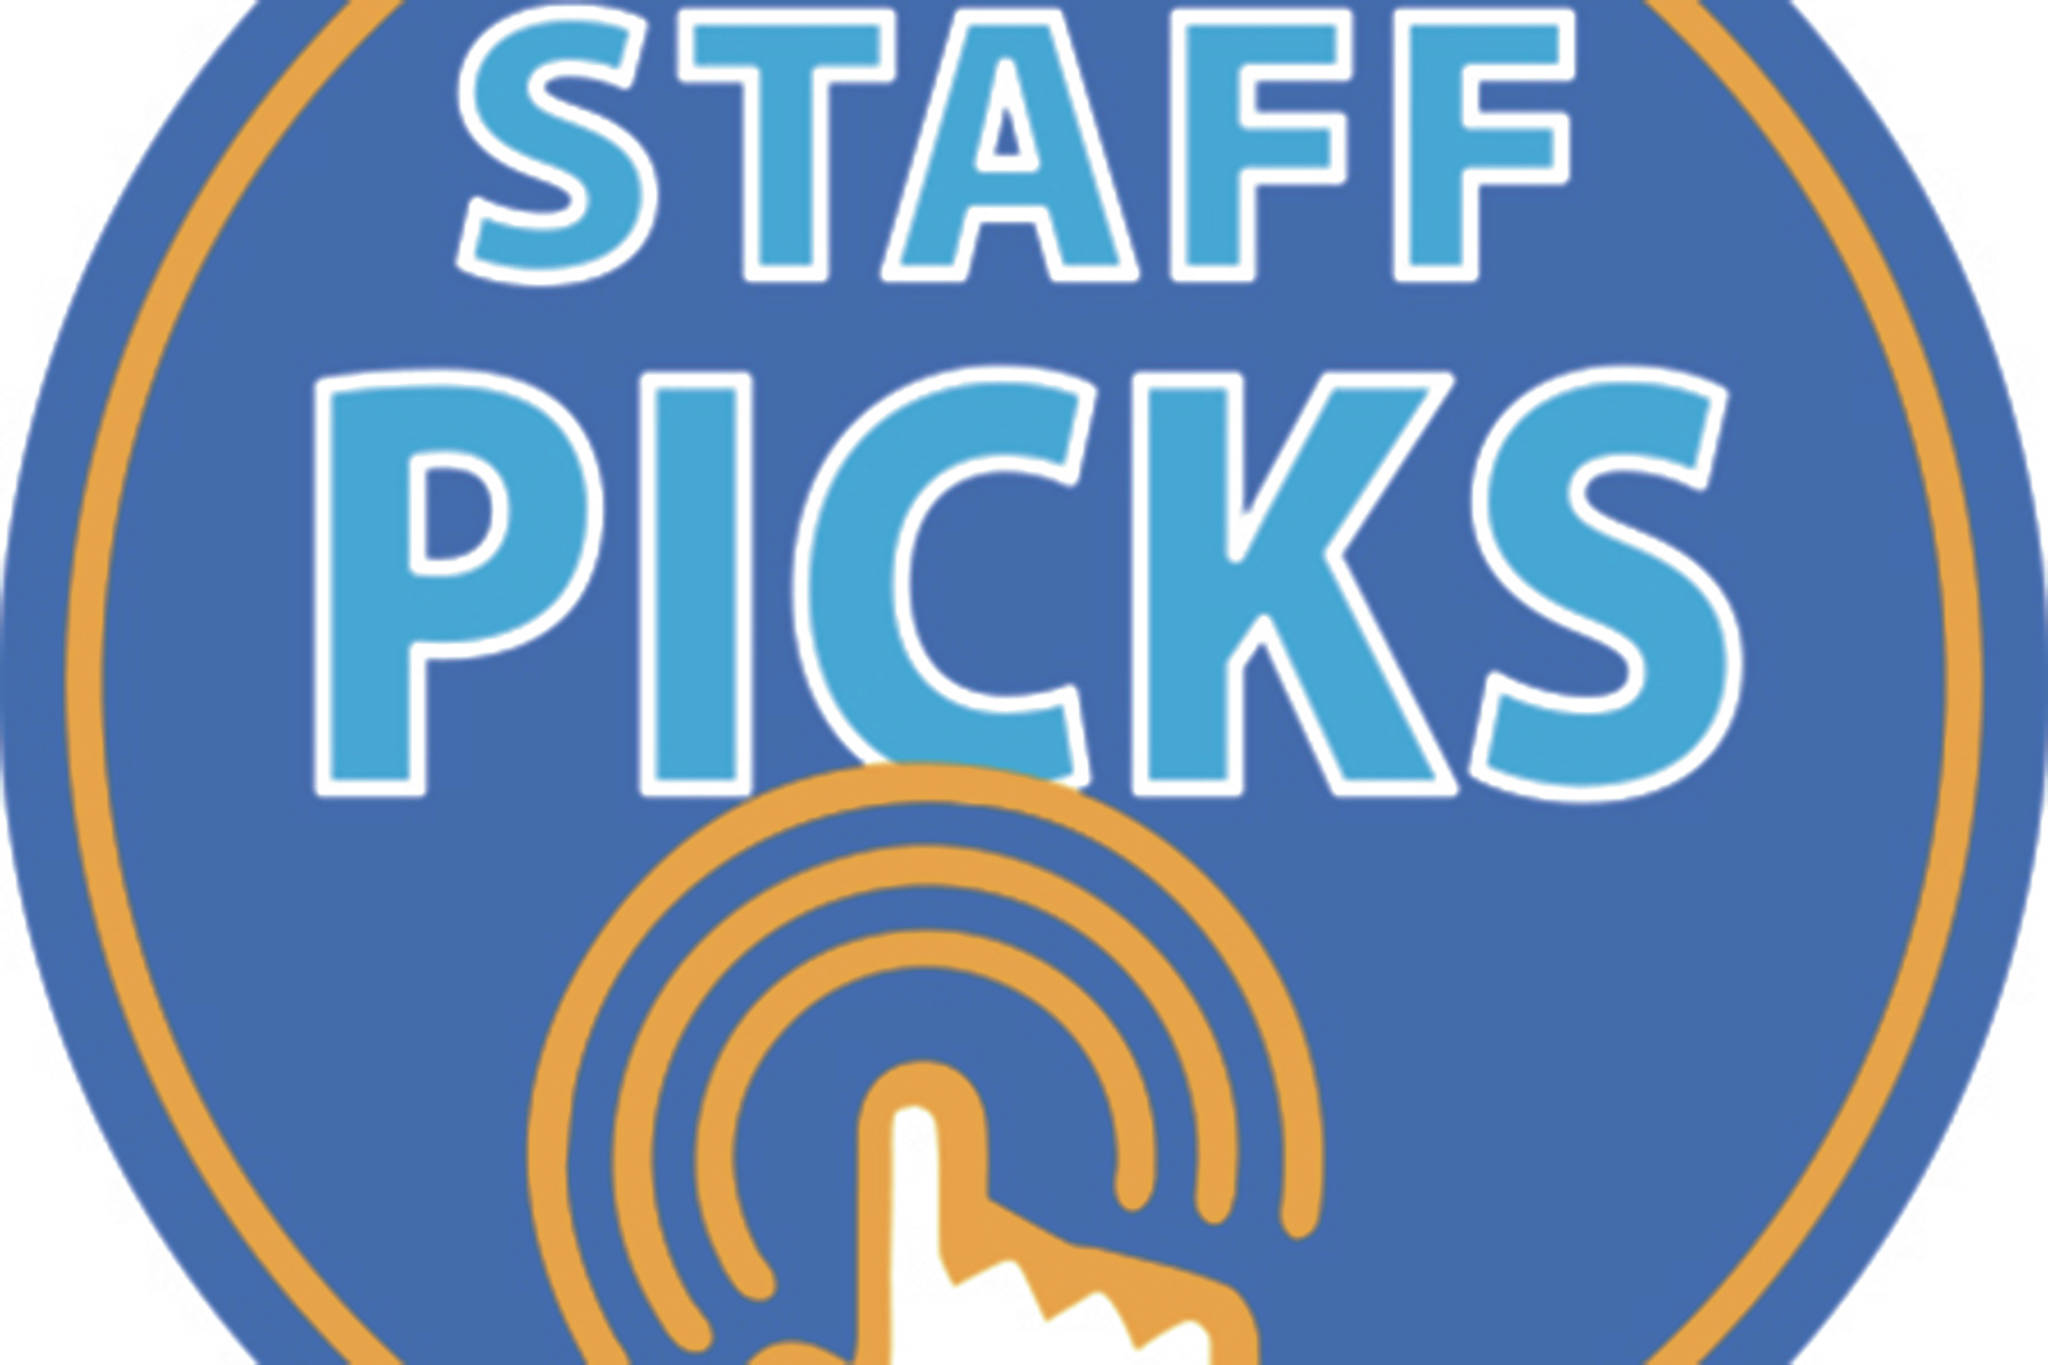 Staff Picks: Check out what we’re reading, watching, playing and listening to this month